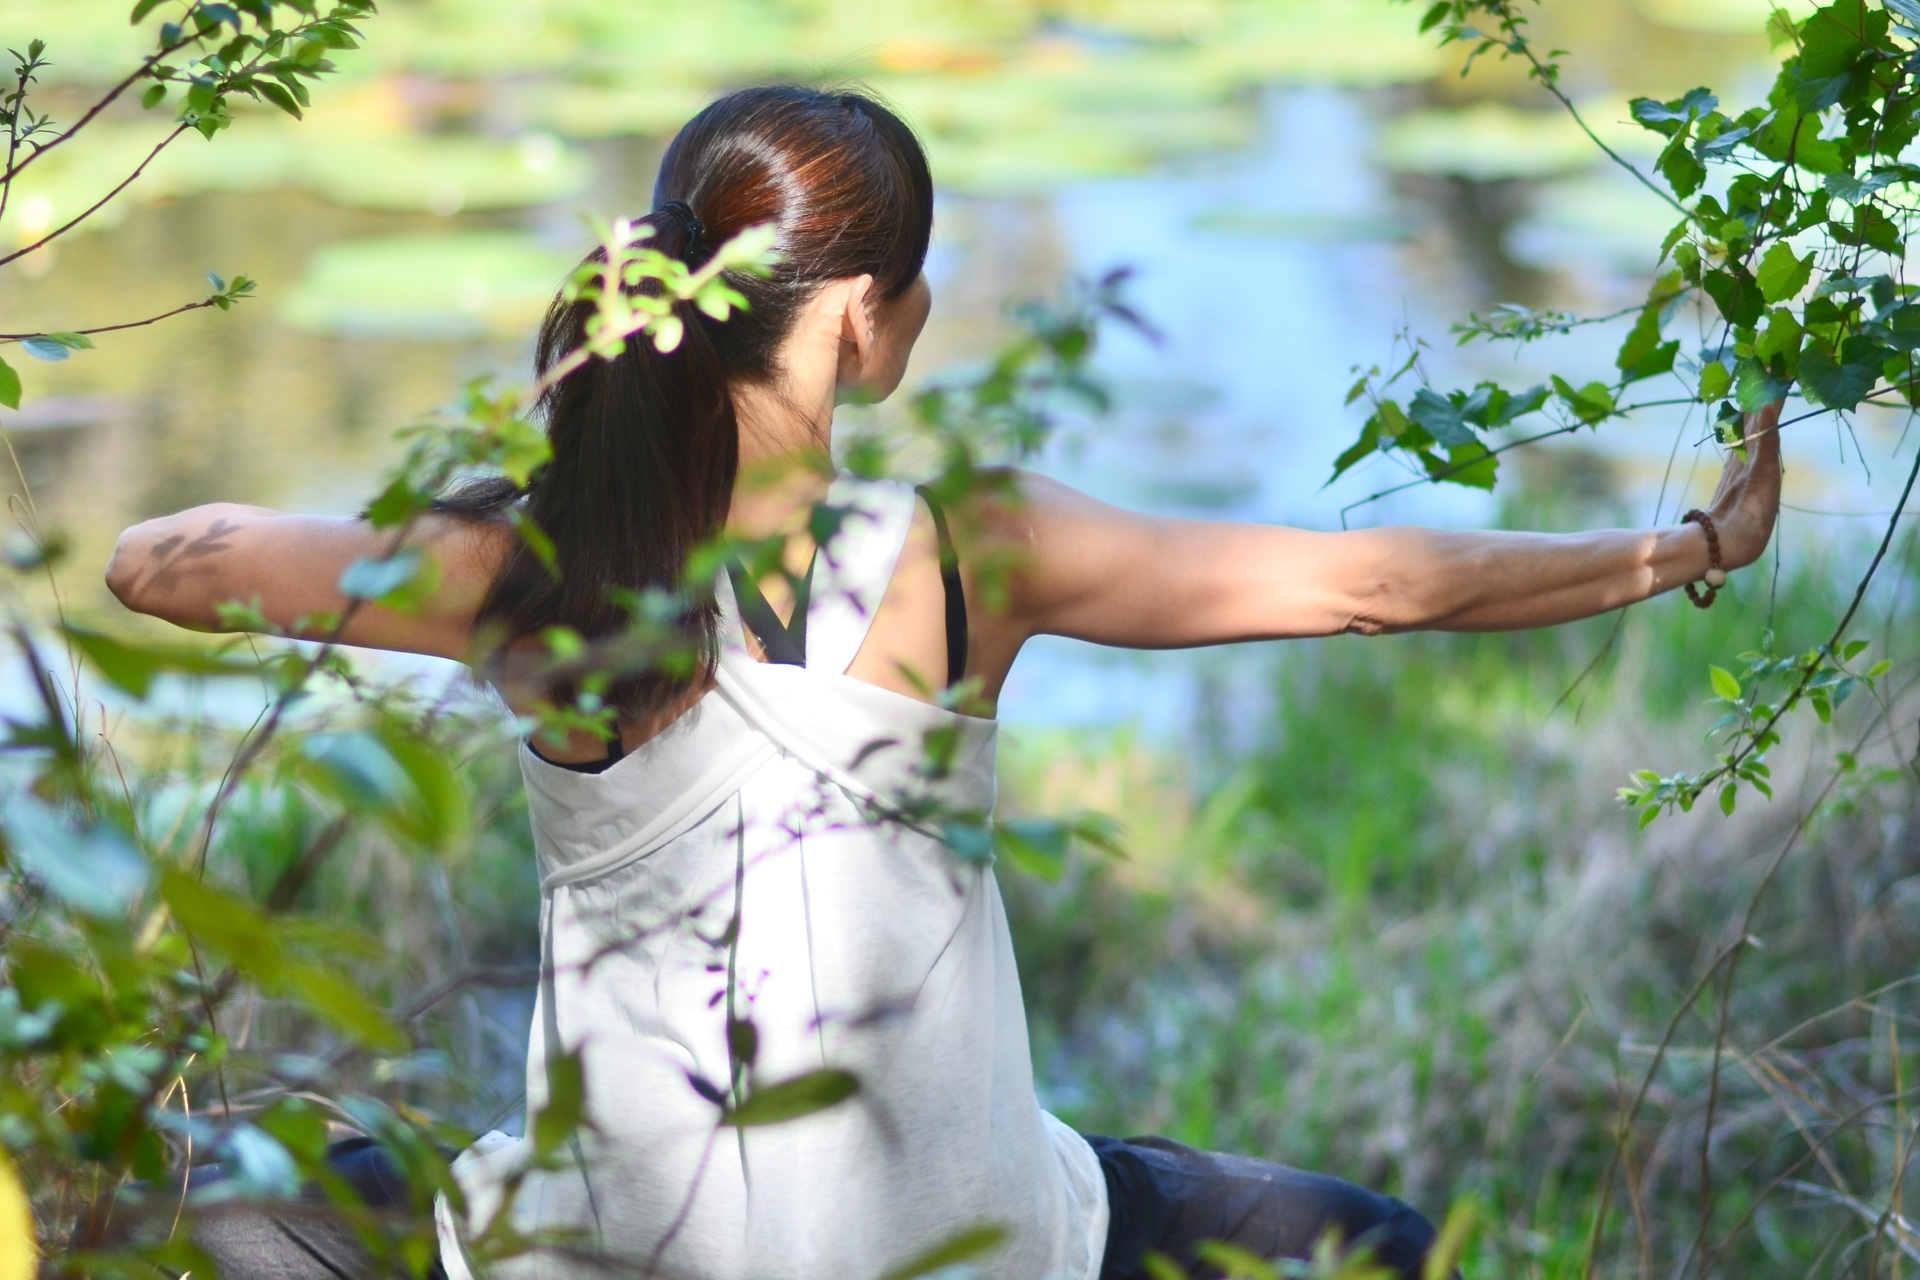 Qigong: What You Need To Know